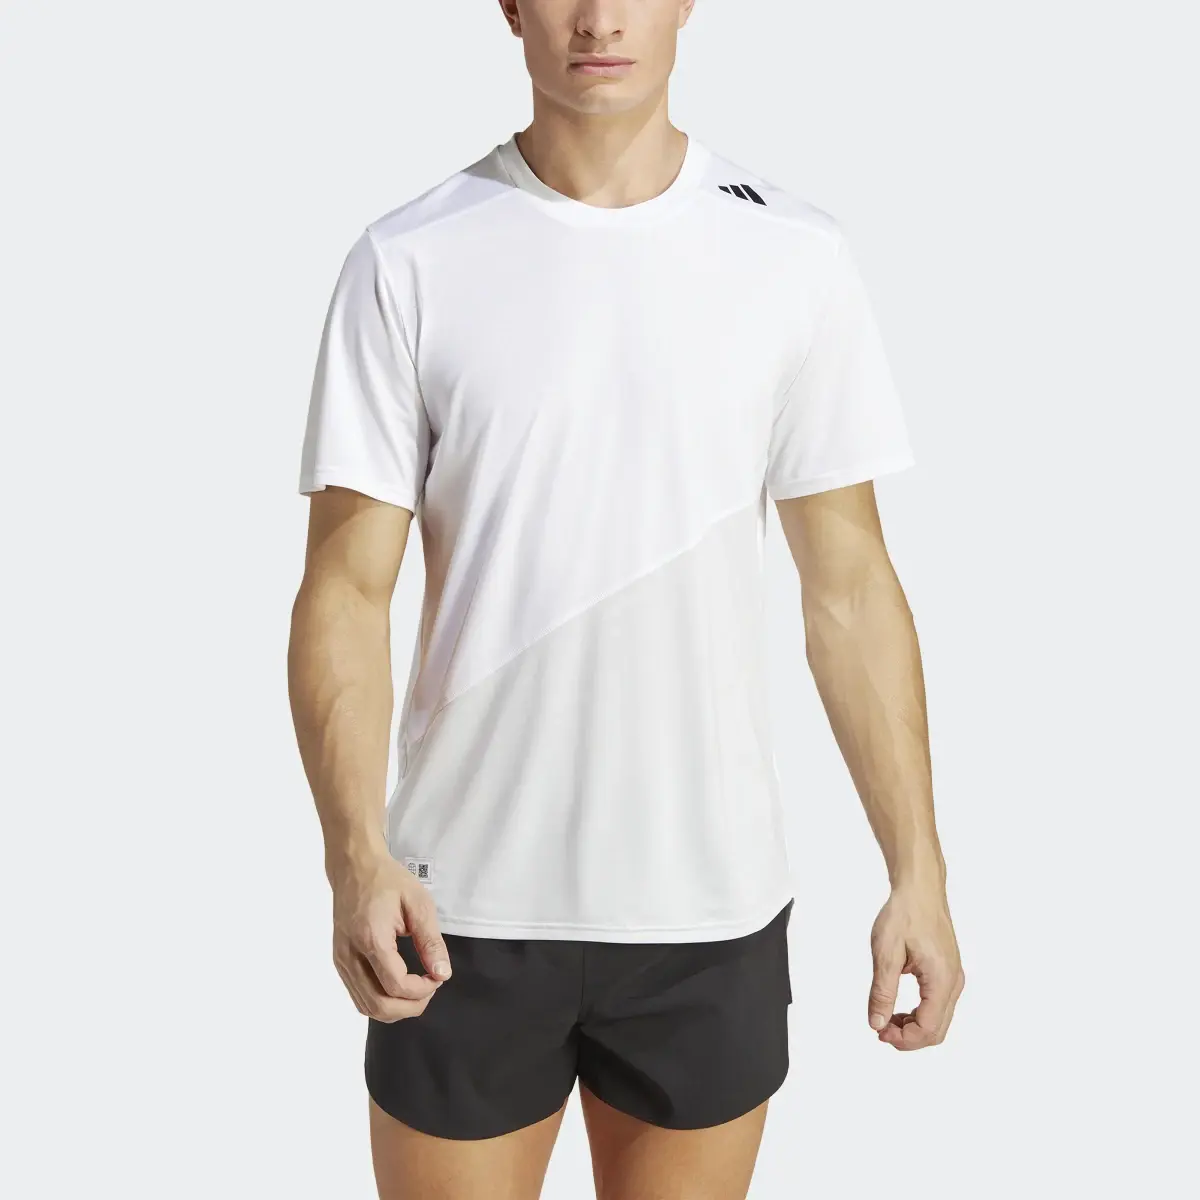 Adidas Made to be Remade Running T-Shirt. 1